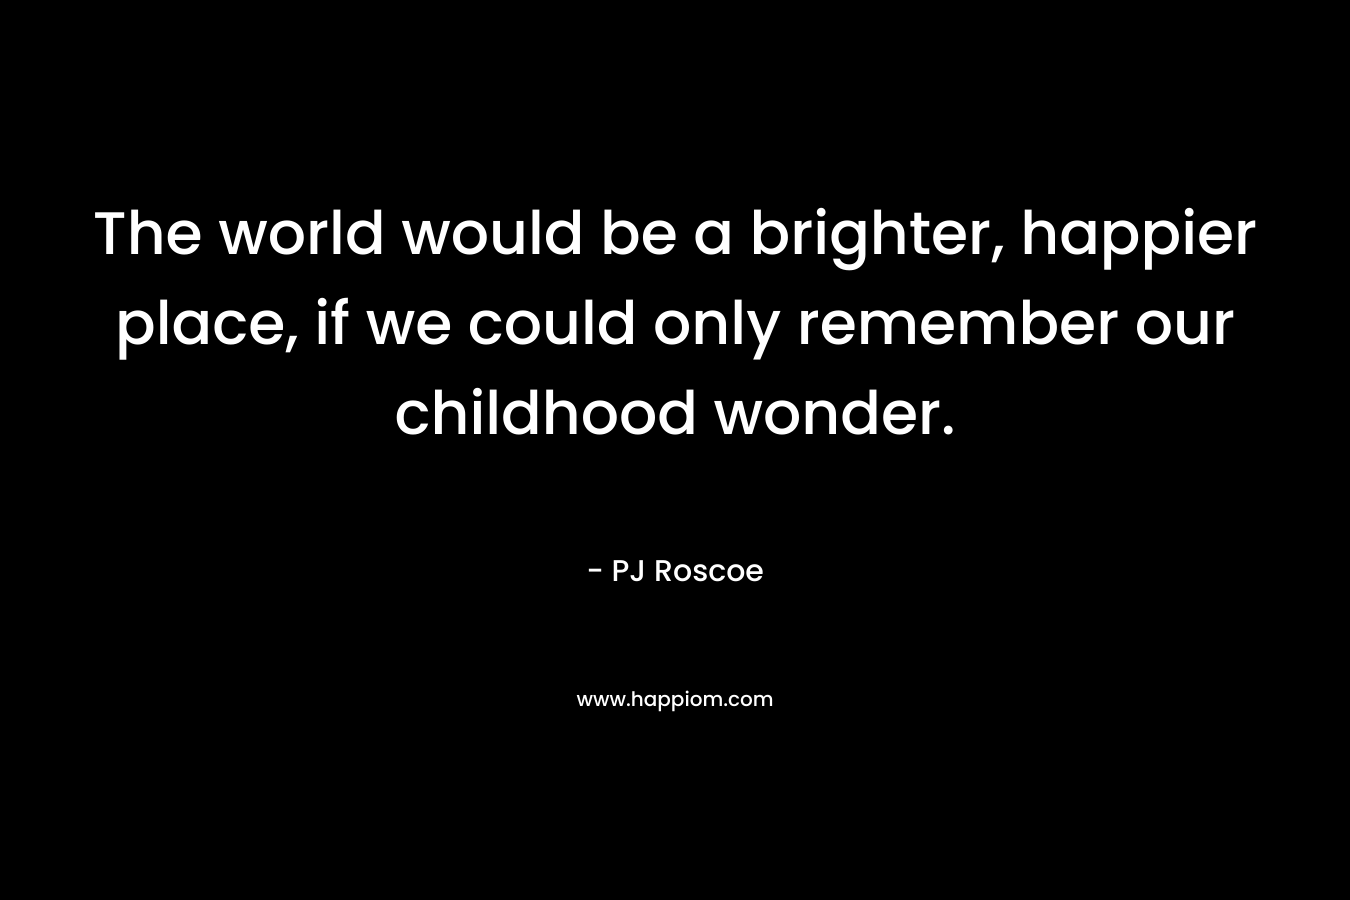 The world would be a brighter, happier place, if we could only remember our childhood wonder. – PJ Roscoe